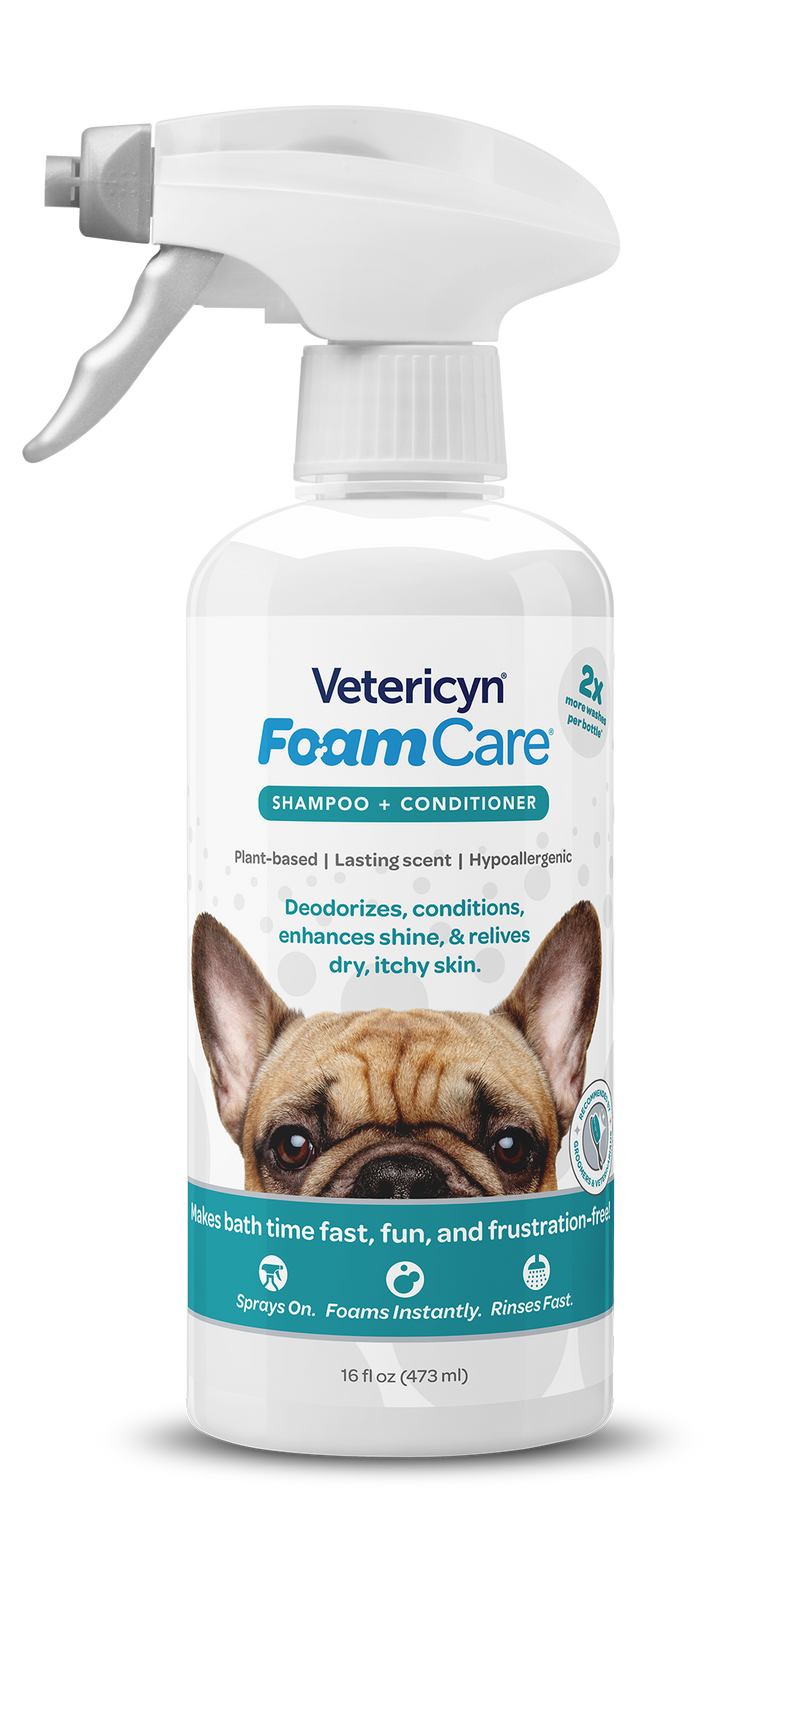 Vetericyn FoamCare Sprayable Shampoo + Conditioner for Dogs & Cats, 16-ounce